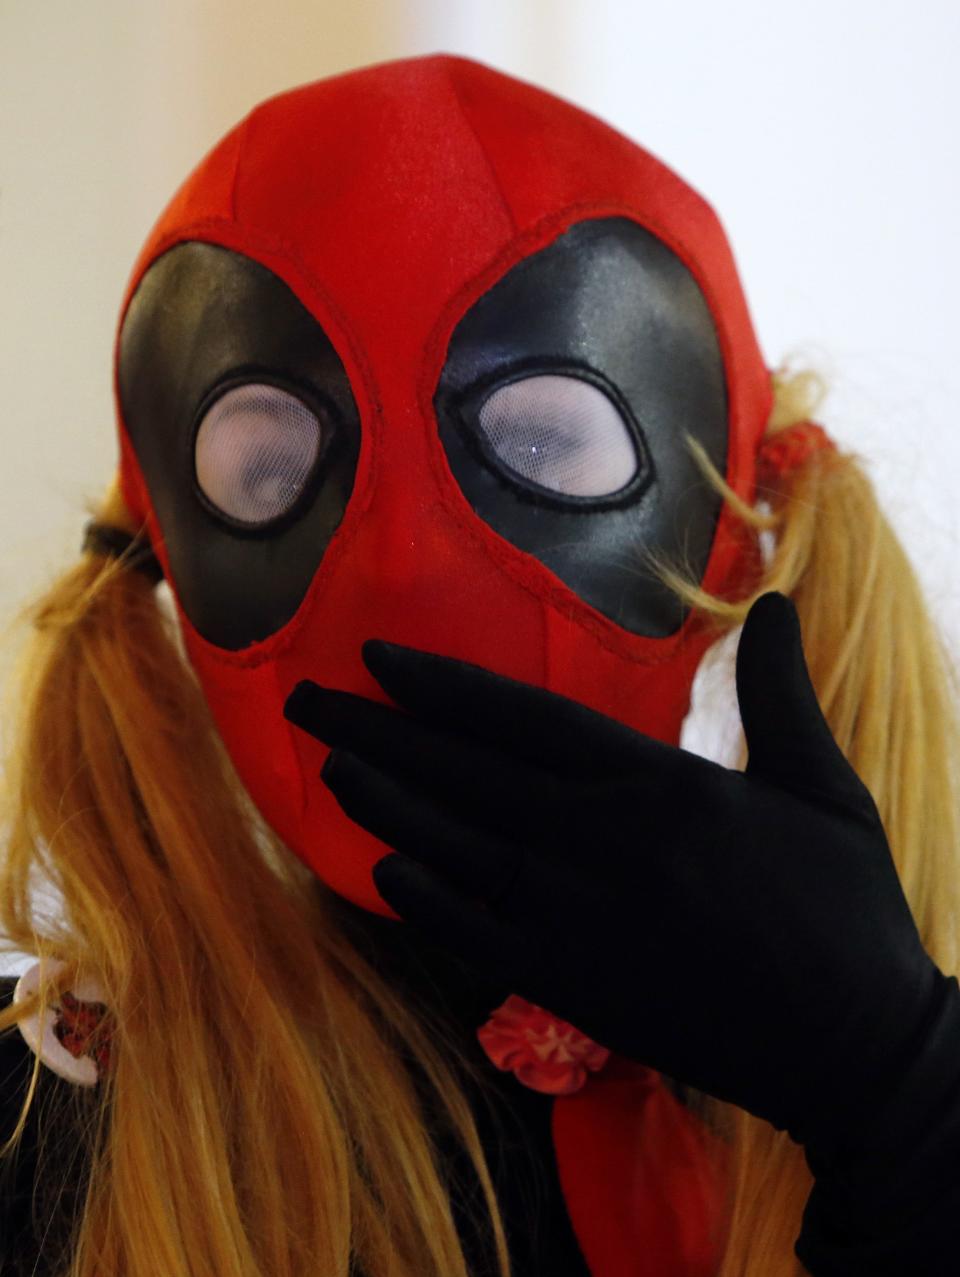 A woman dressed in the costume of Marvel Comics character "Deadpool" poses for a photograph at Comic-Con Russia convention and IgroMir 2014 exhibition in Moscow, October 3, 2014. REUTERS/Sergei Karpukhin (RUSSIA - Tags: ENTERTAINMENT SOCIETY)